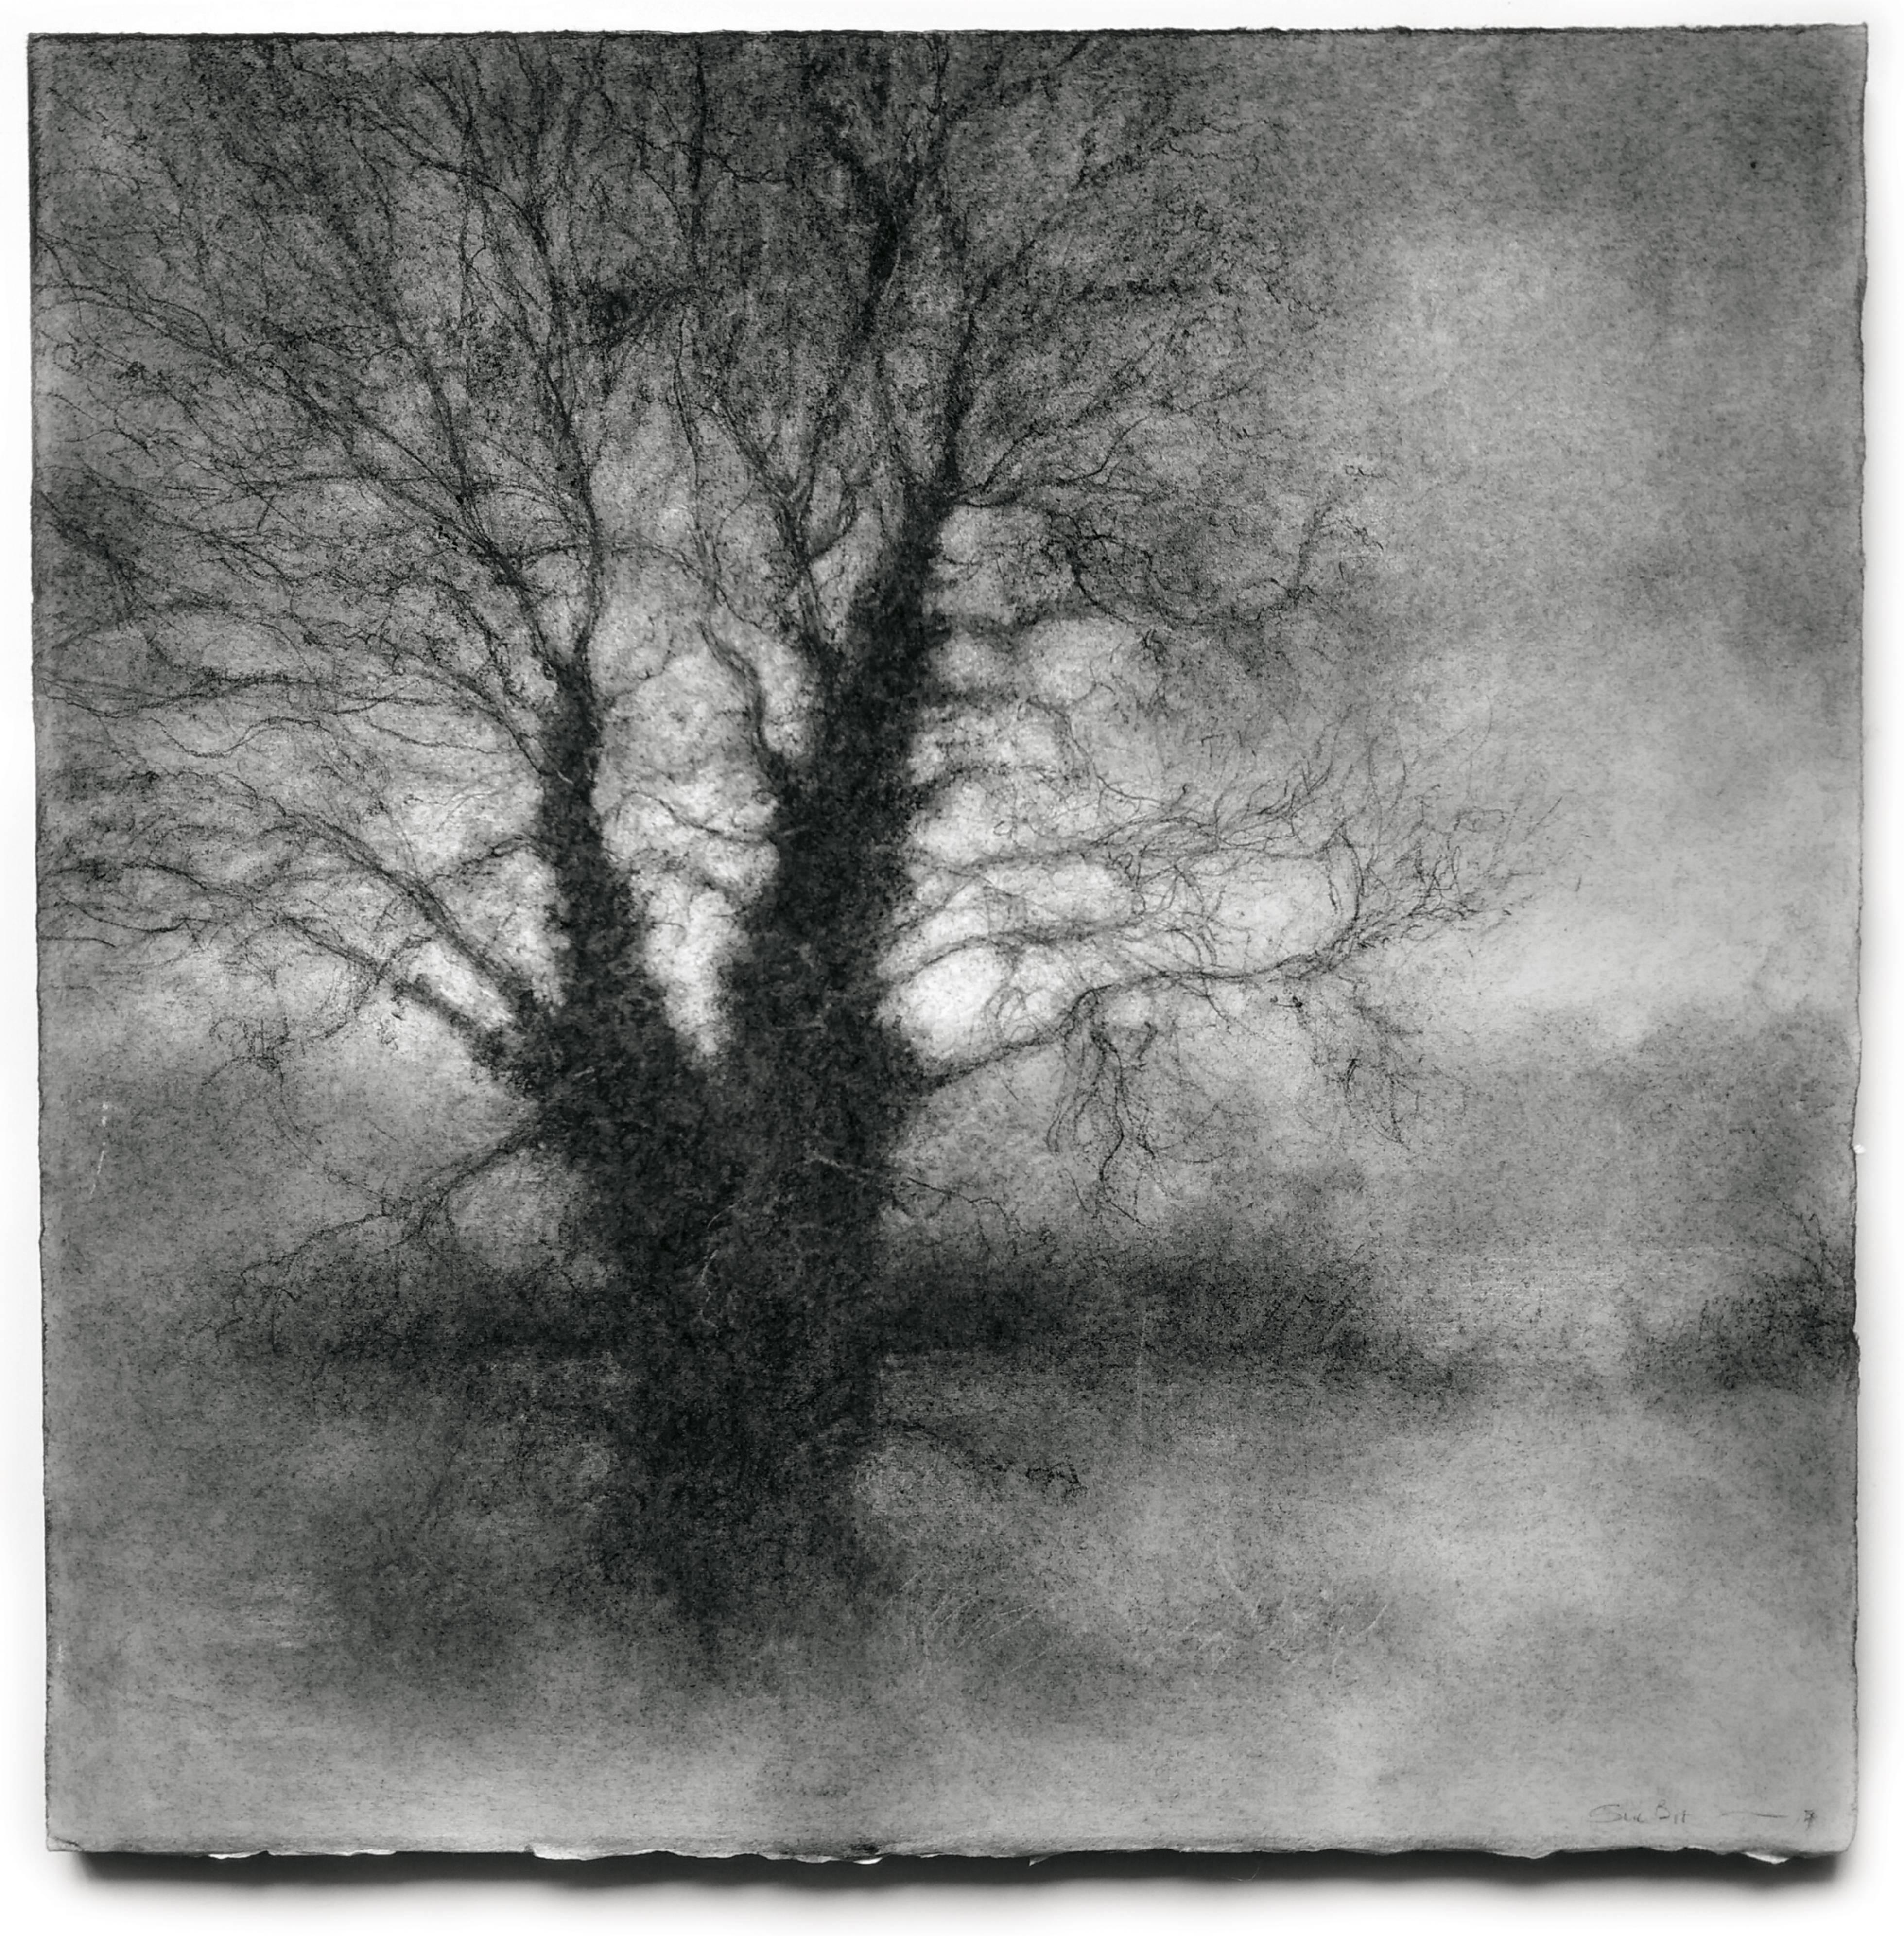 Winter Tree 4 (Black & White Realistic Landscape Charcoal Drawing on Paper)